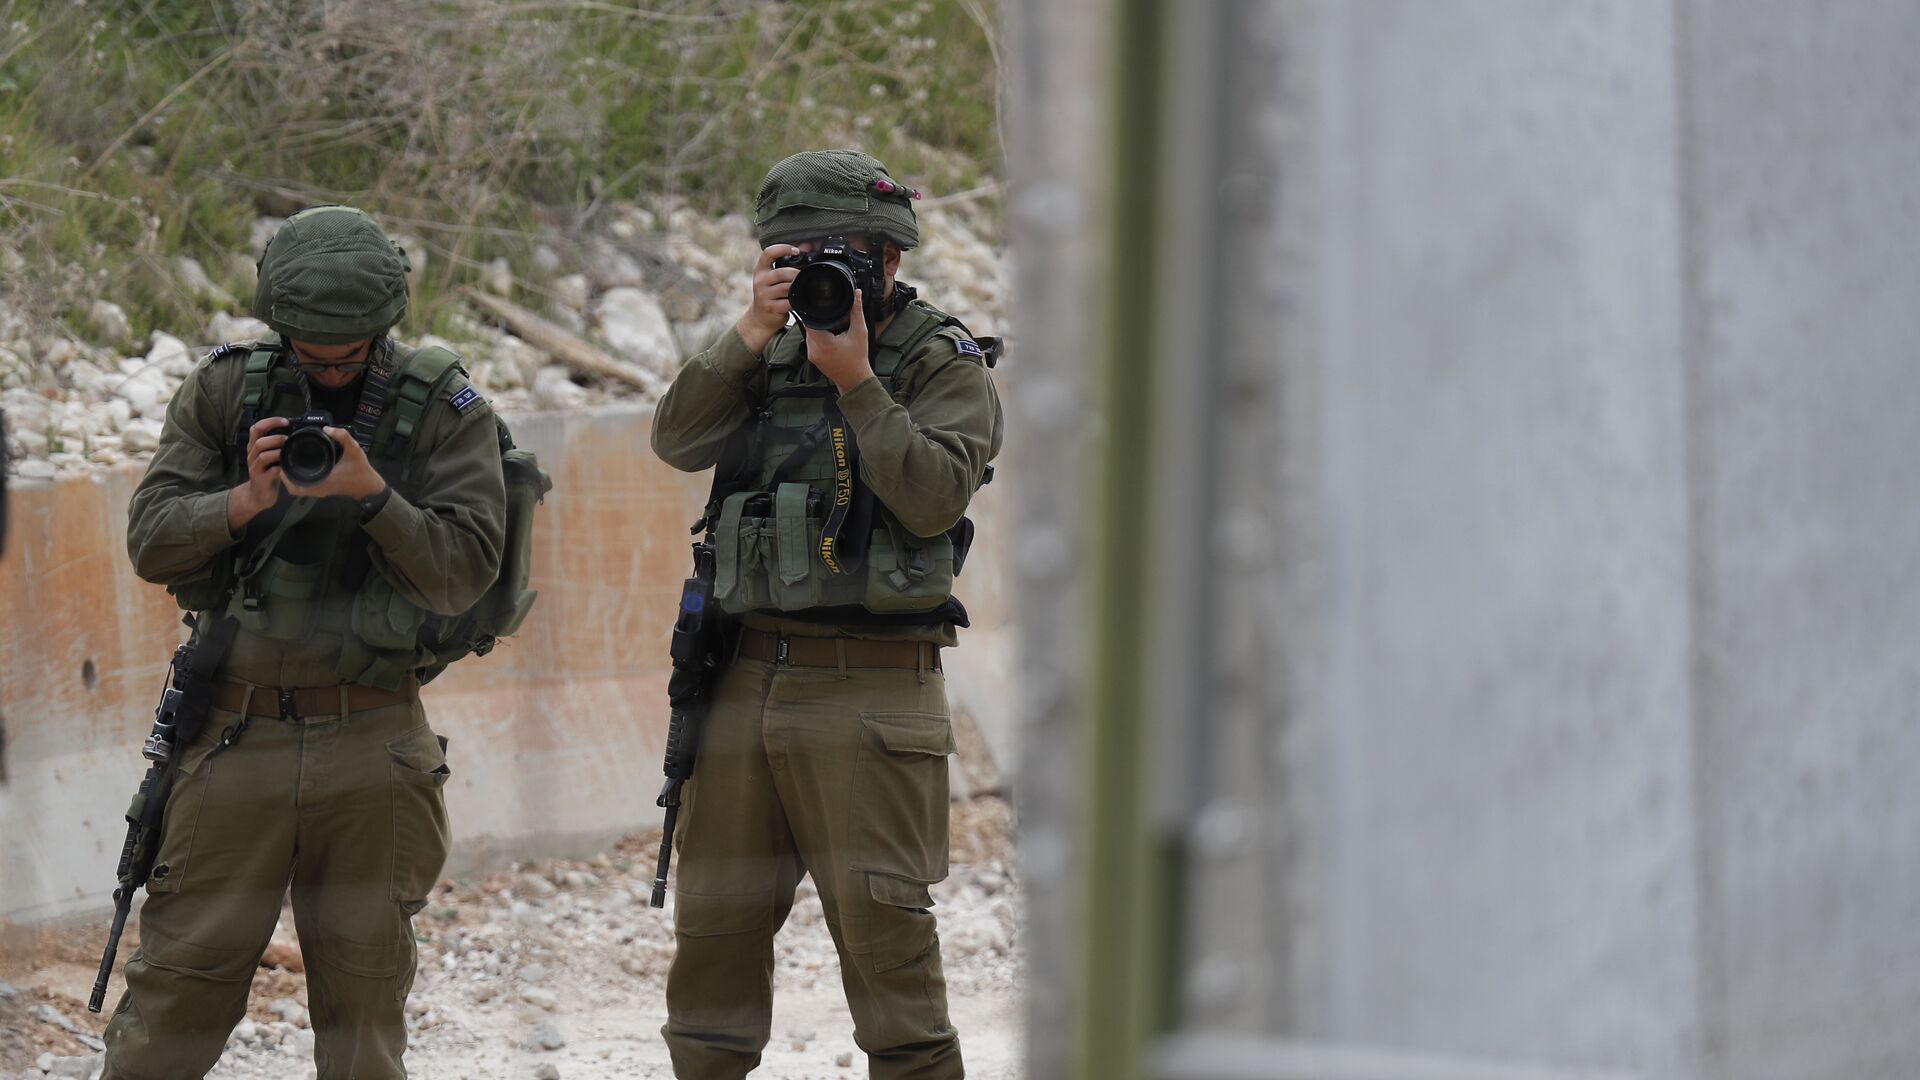 Israeli soldiers take pictures of construction work on a wall along the Israeli border, in the costal town of Naqoura, south Lebanon, Thursday, Feb. 8, 2018 - Sputnik International, 1920, 21.06.2022